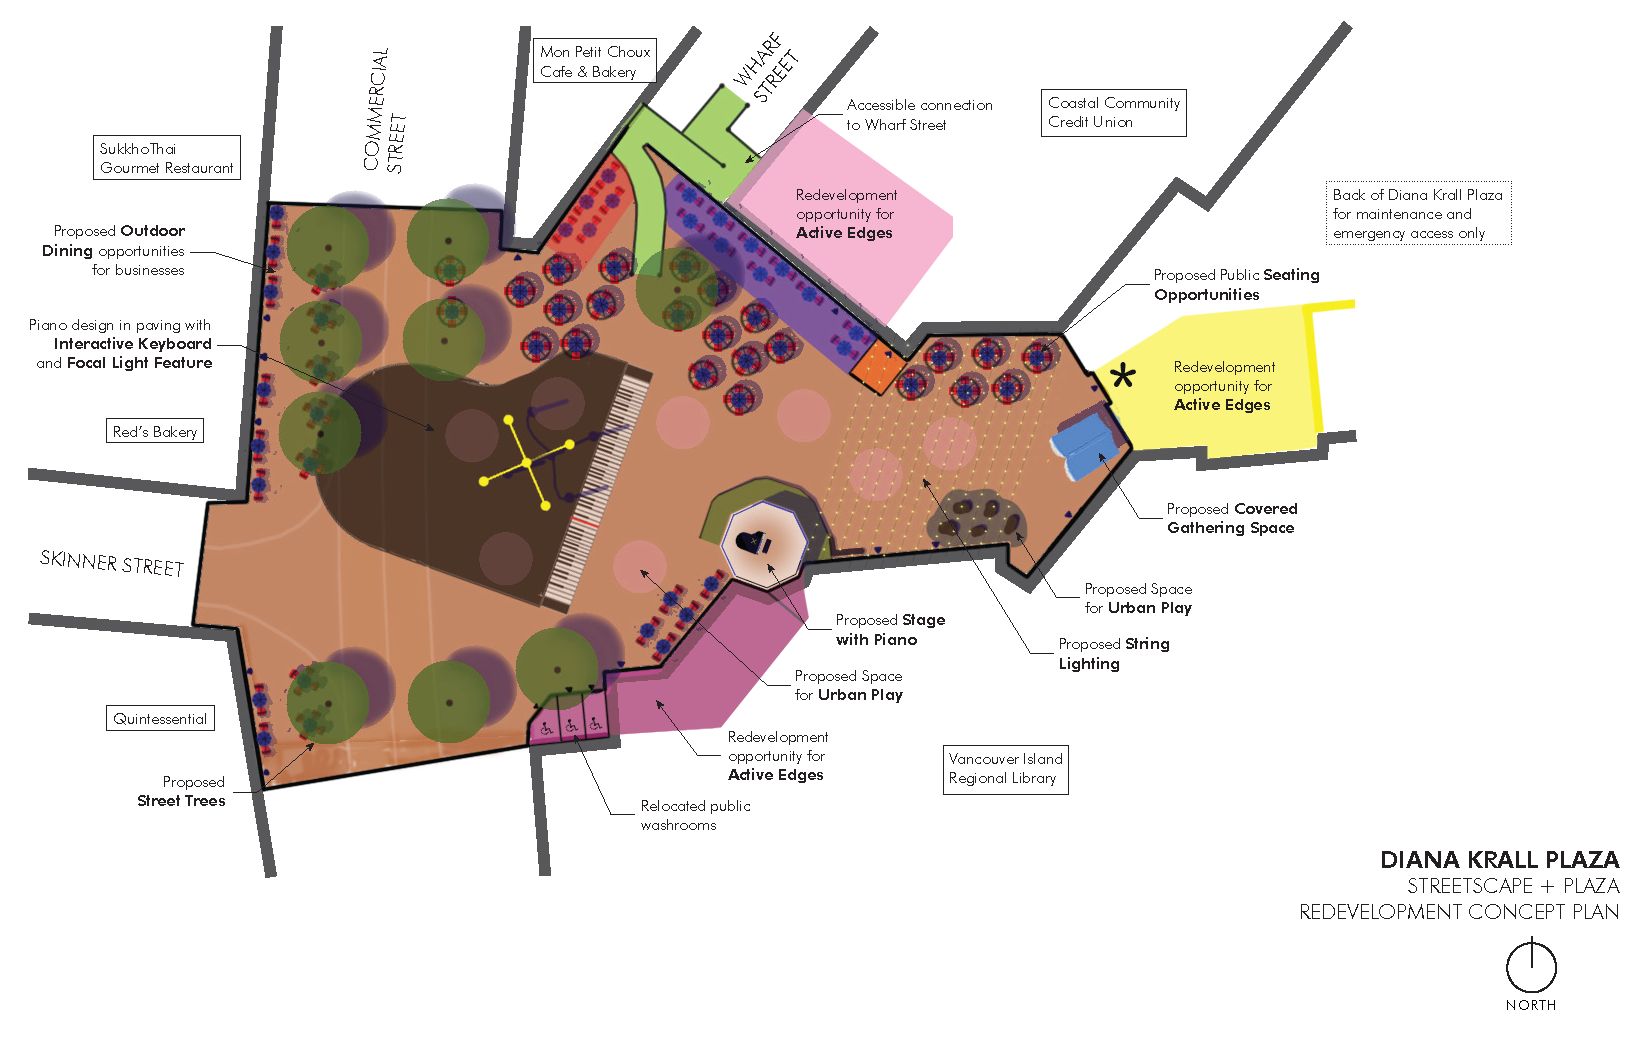 Nanaimo plaza design featuring trees, open space, and other public amenities